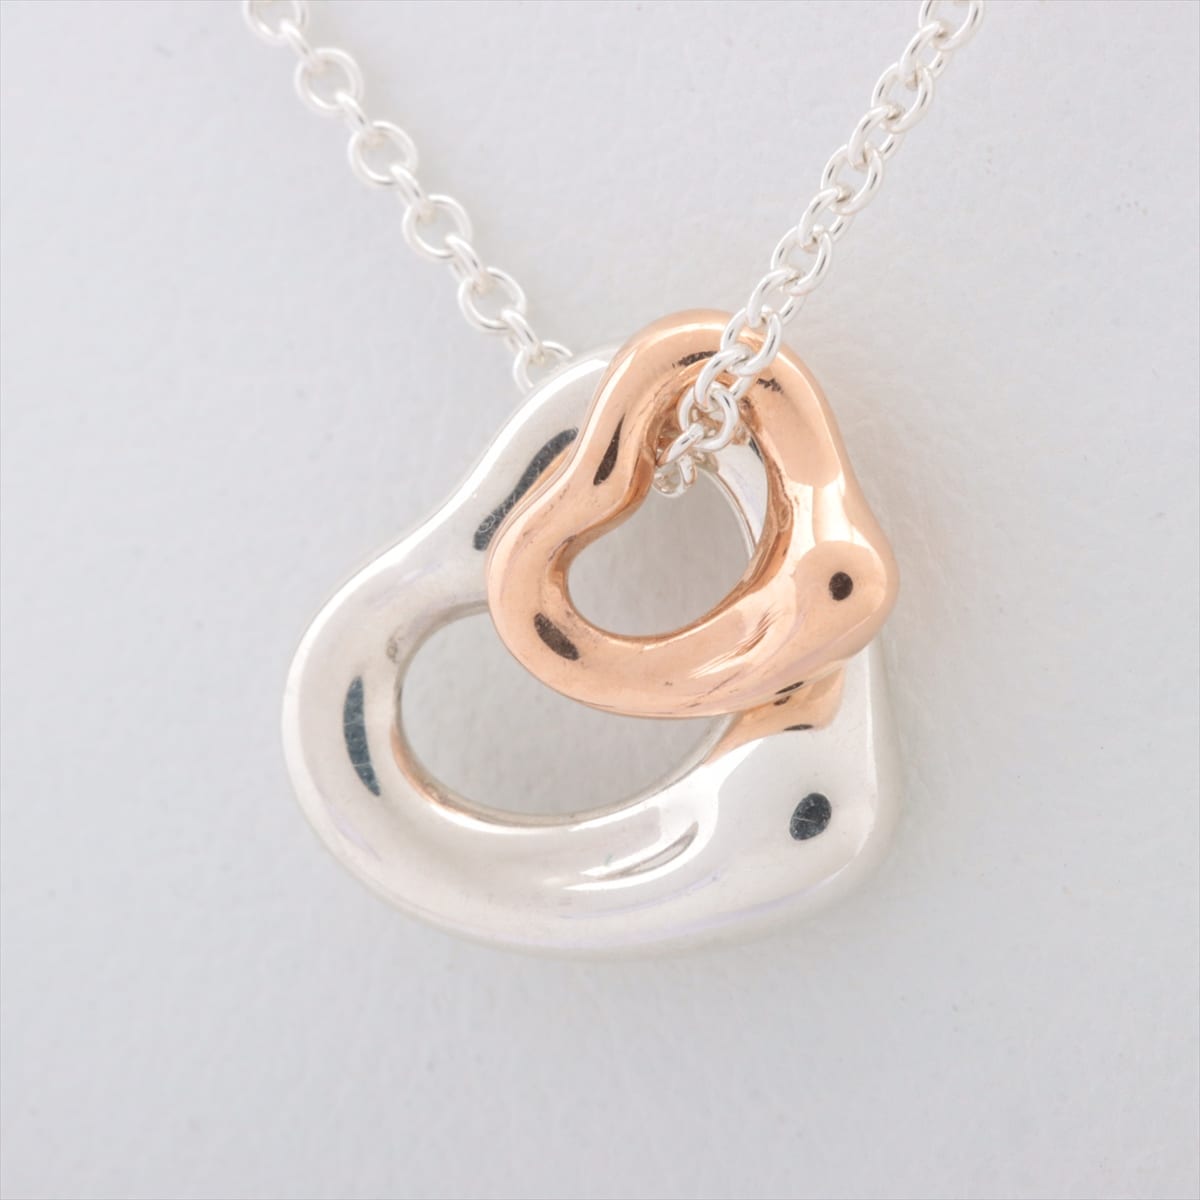 Tiffany Double Open Heart Necklace 925×750 2.5g Gold × Silver